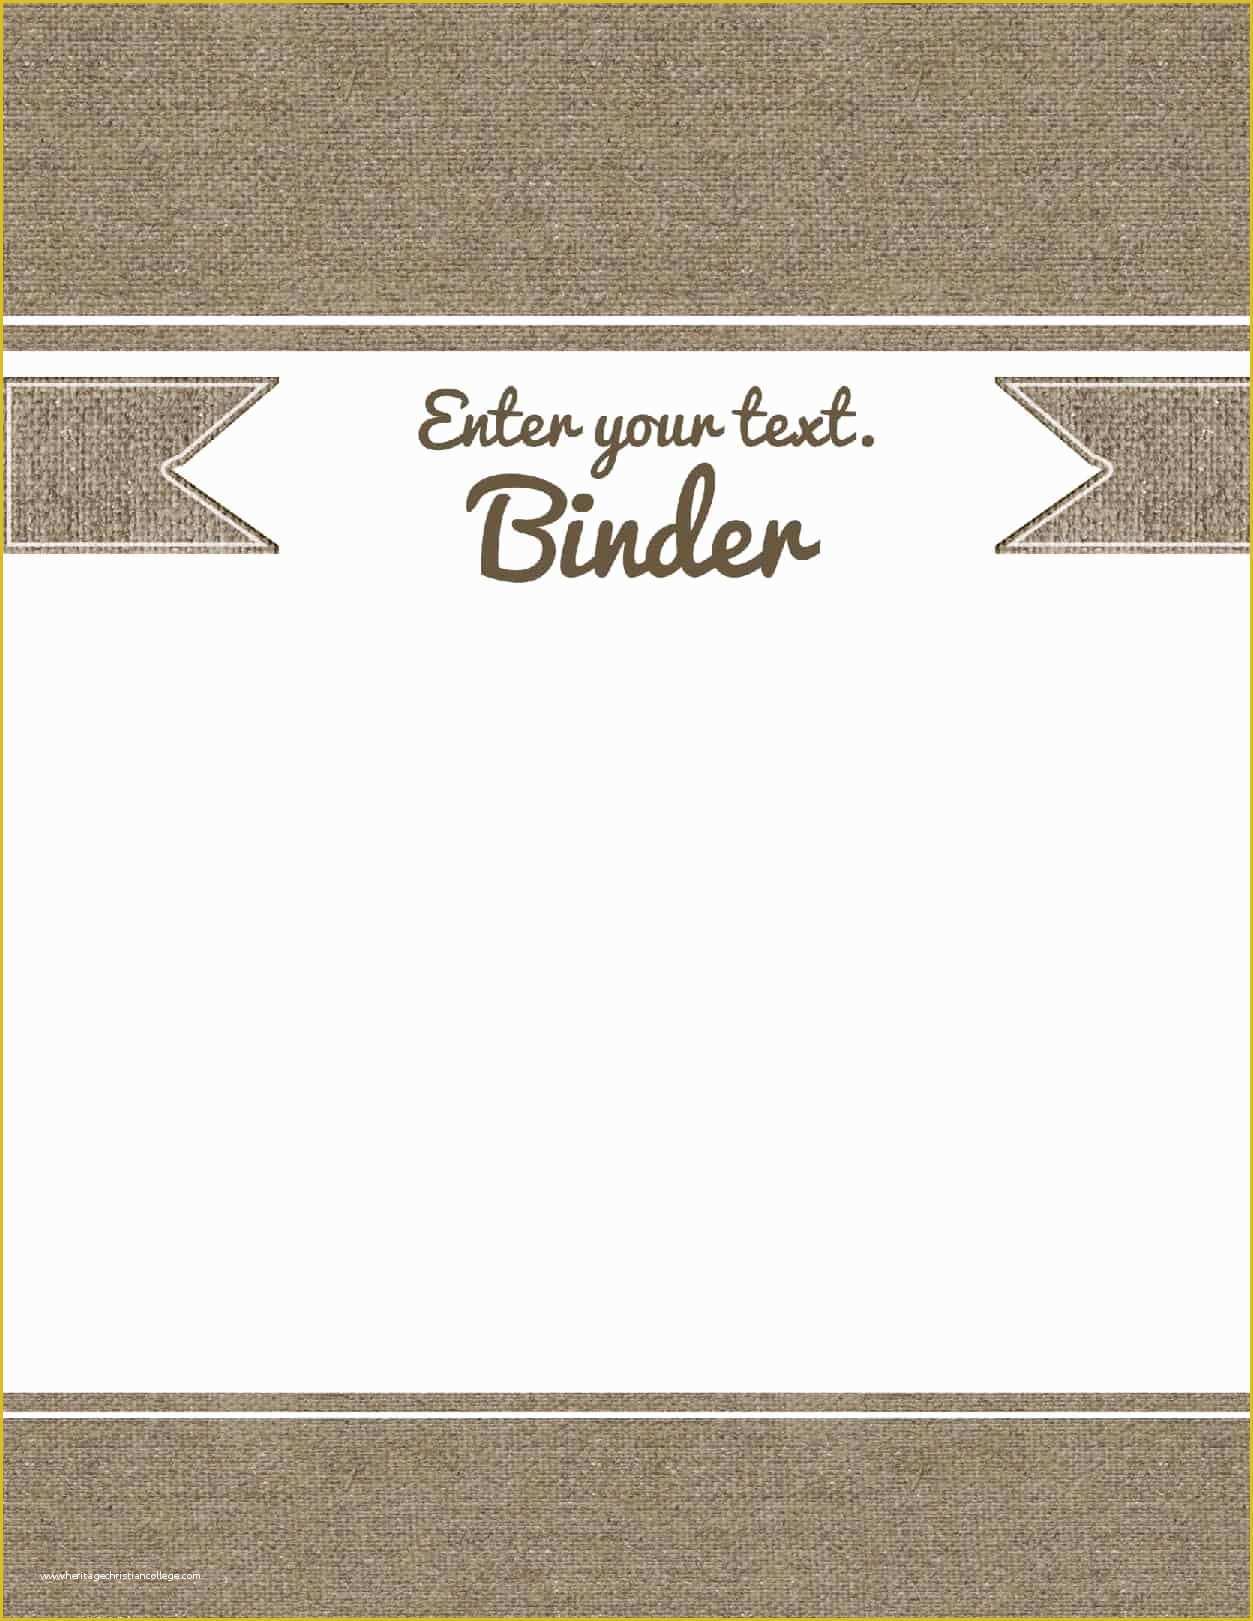 Free Photo Templates for Printing Of Free Binder Cover Templates